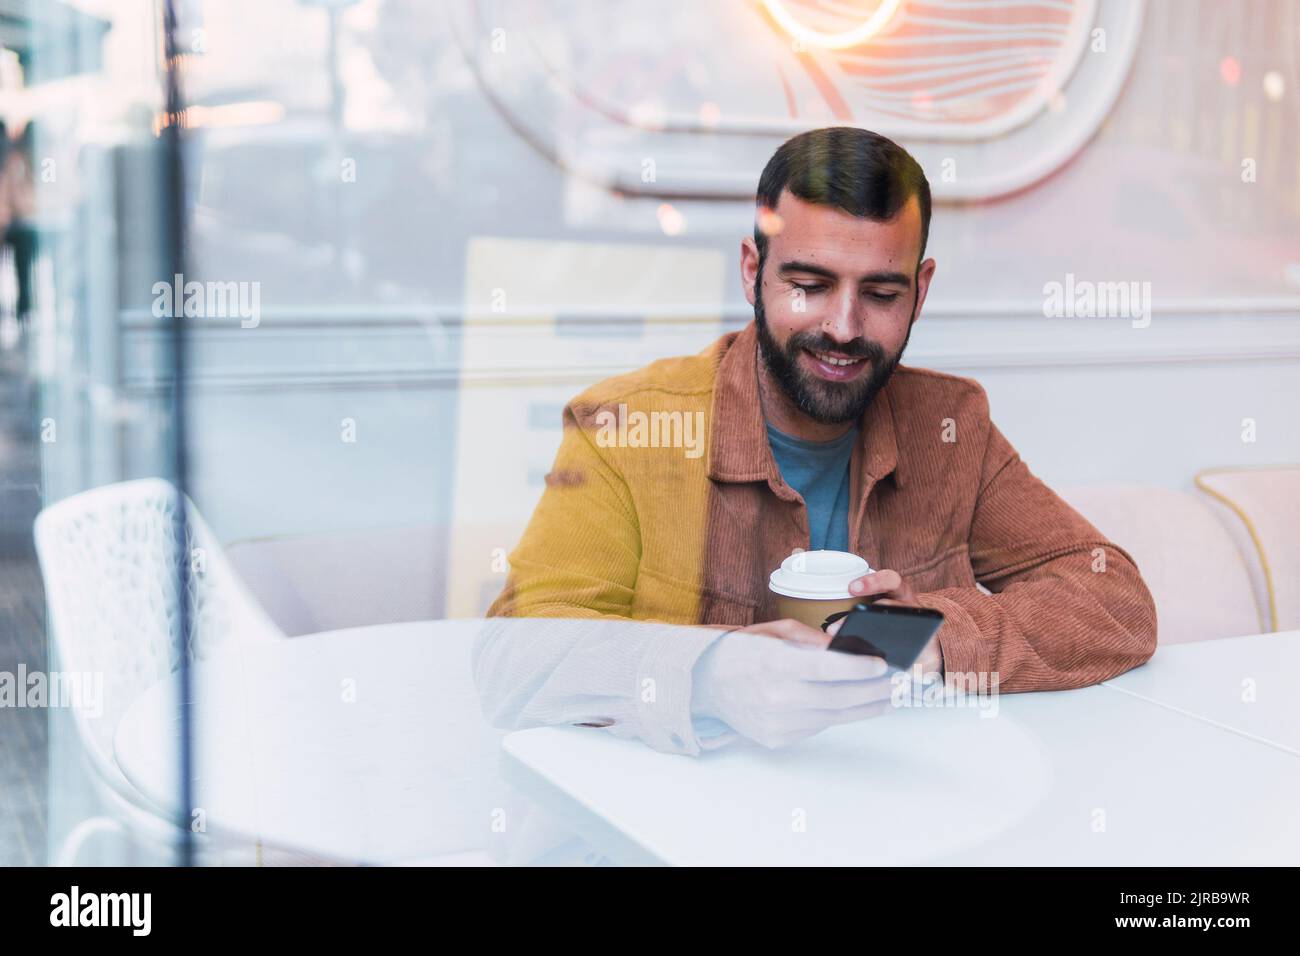 Smiling young man using smart phone seen through glass at cafe Stock Photo